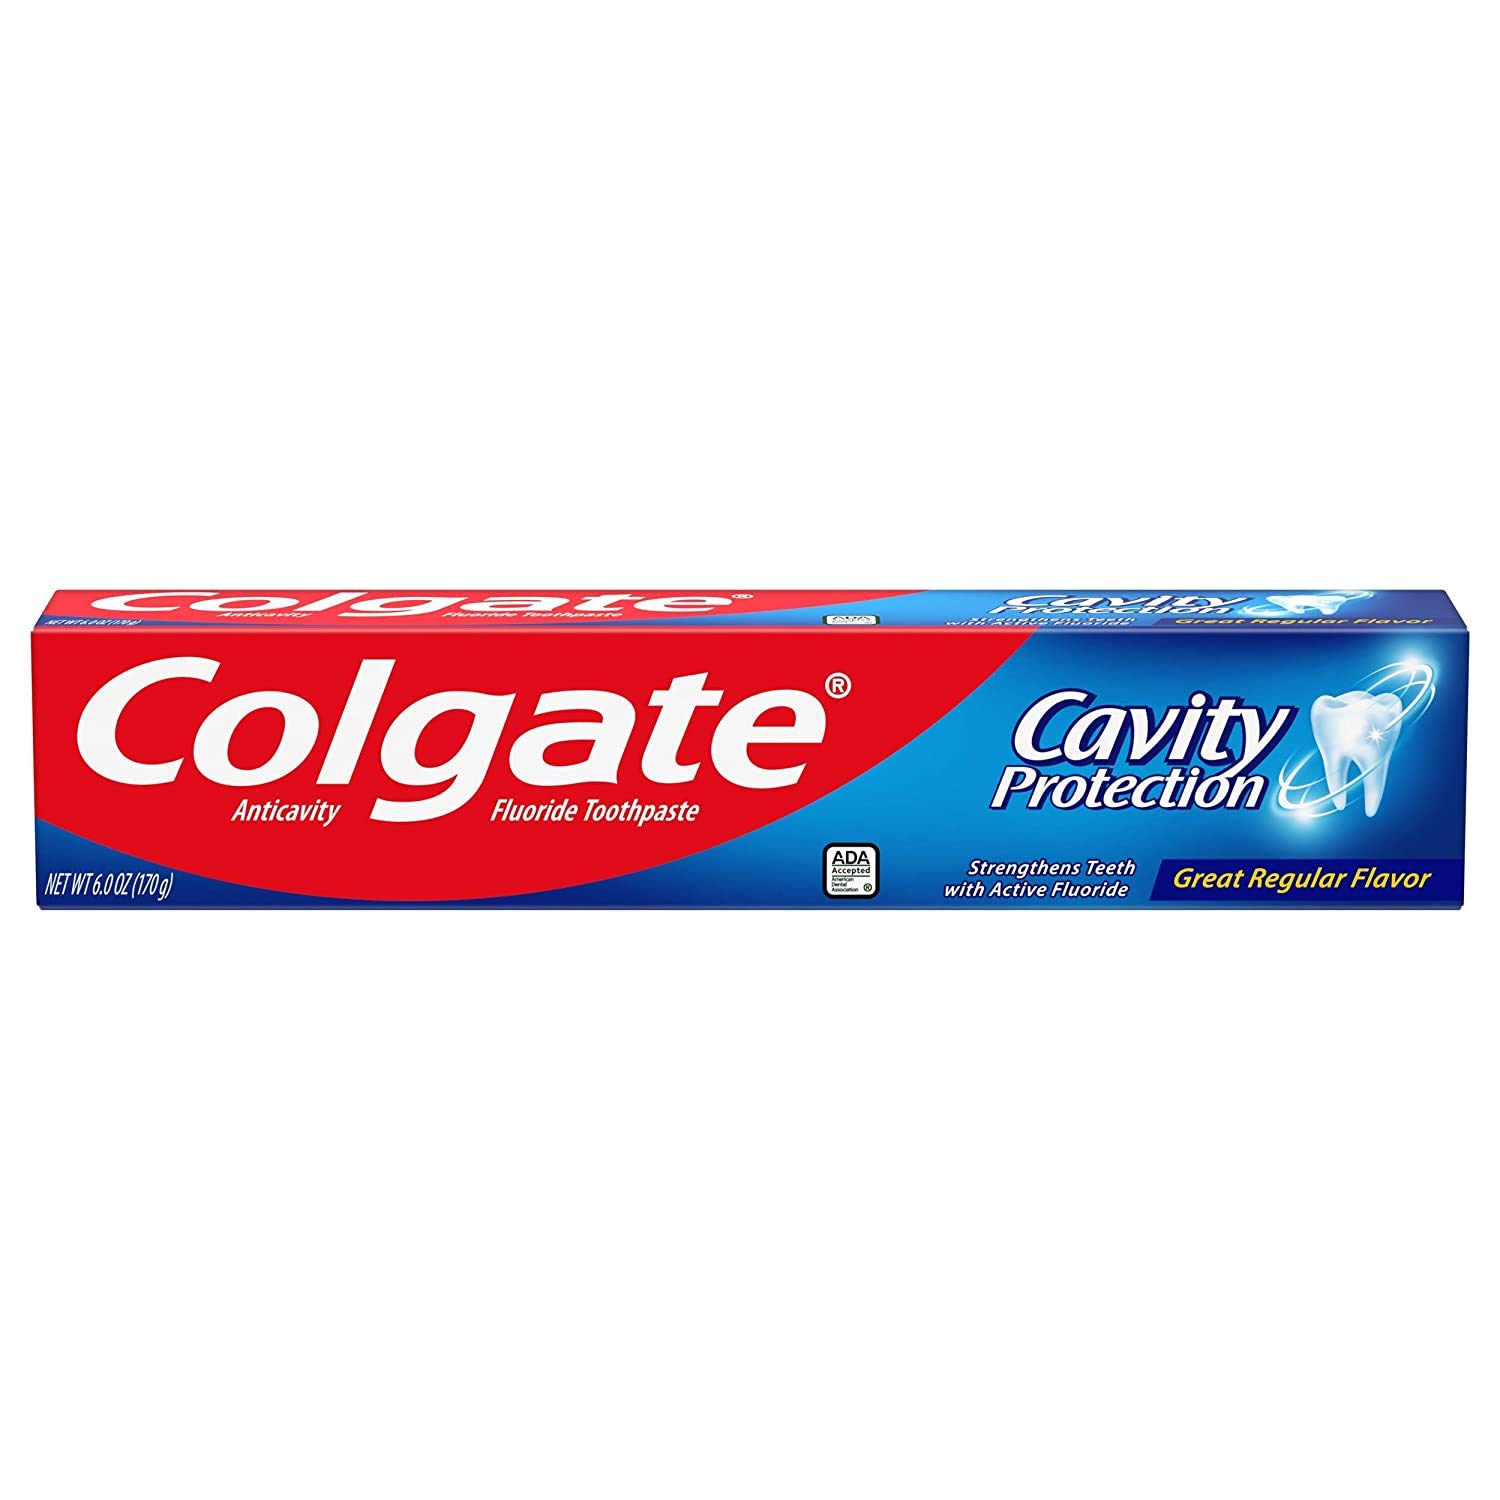 Detail Colgate Toothpaste Images Nomer 3